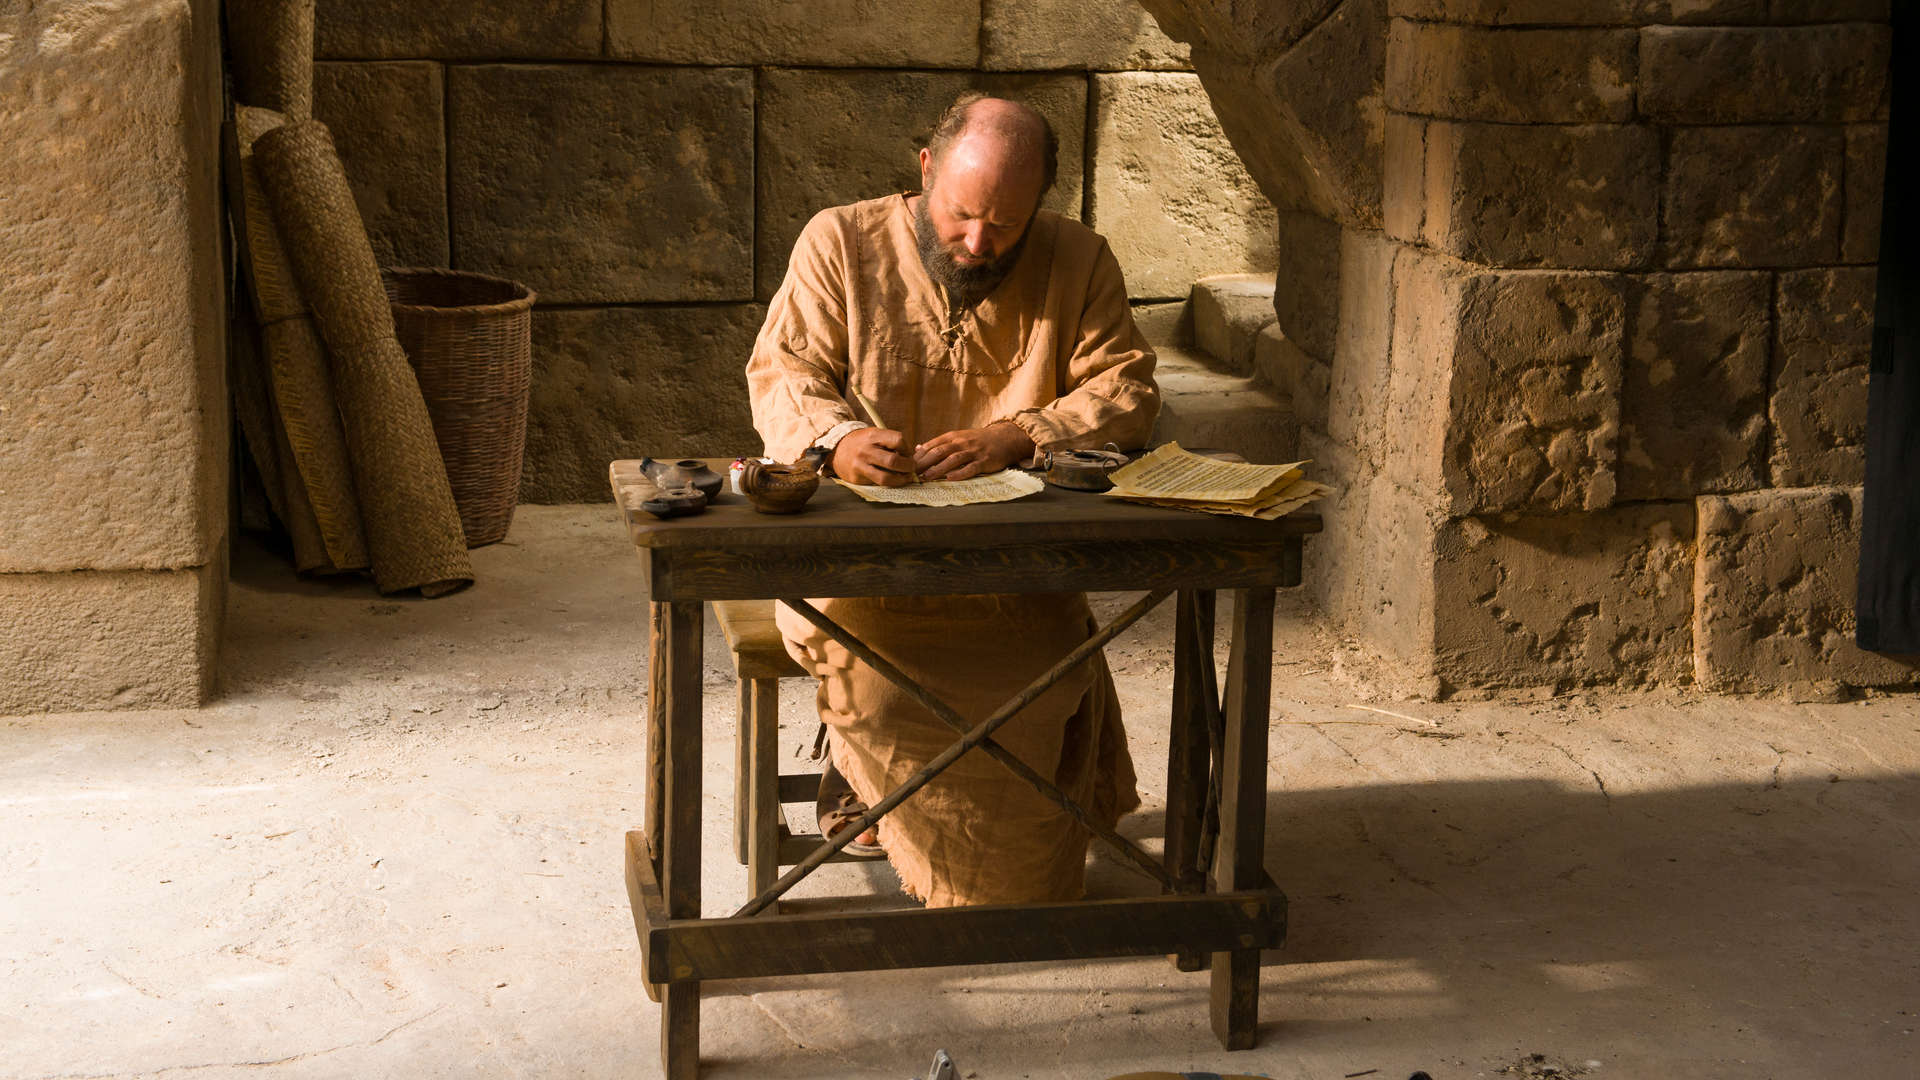 A still from a Bible Video of Paul writing an epistle on a piece of paper on a desk